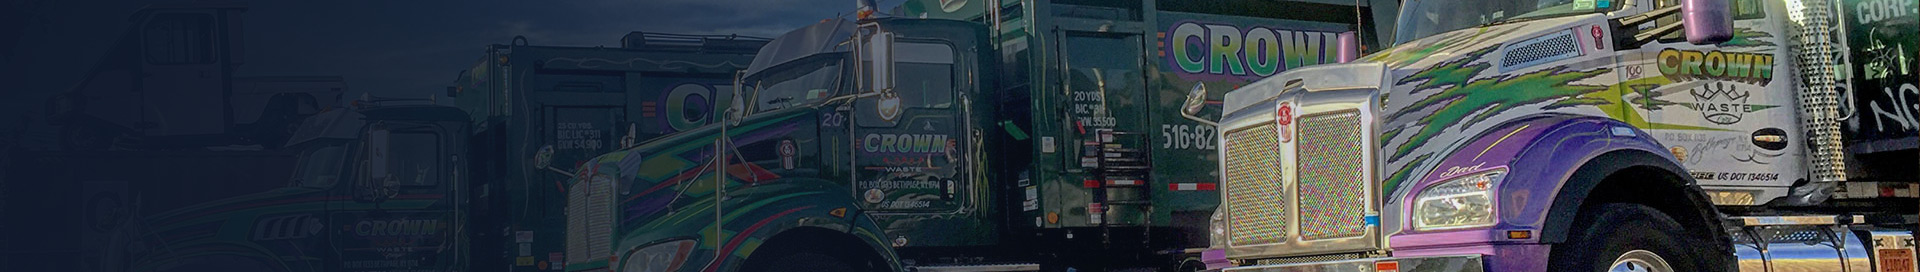 crown waste recycling corp